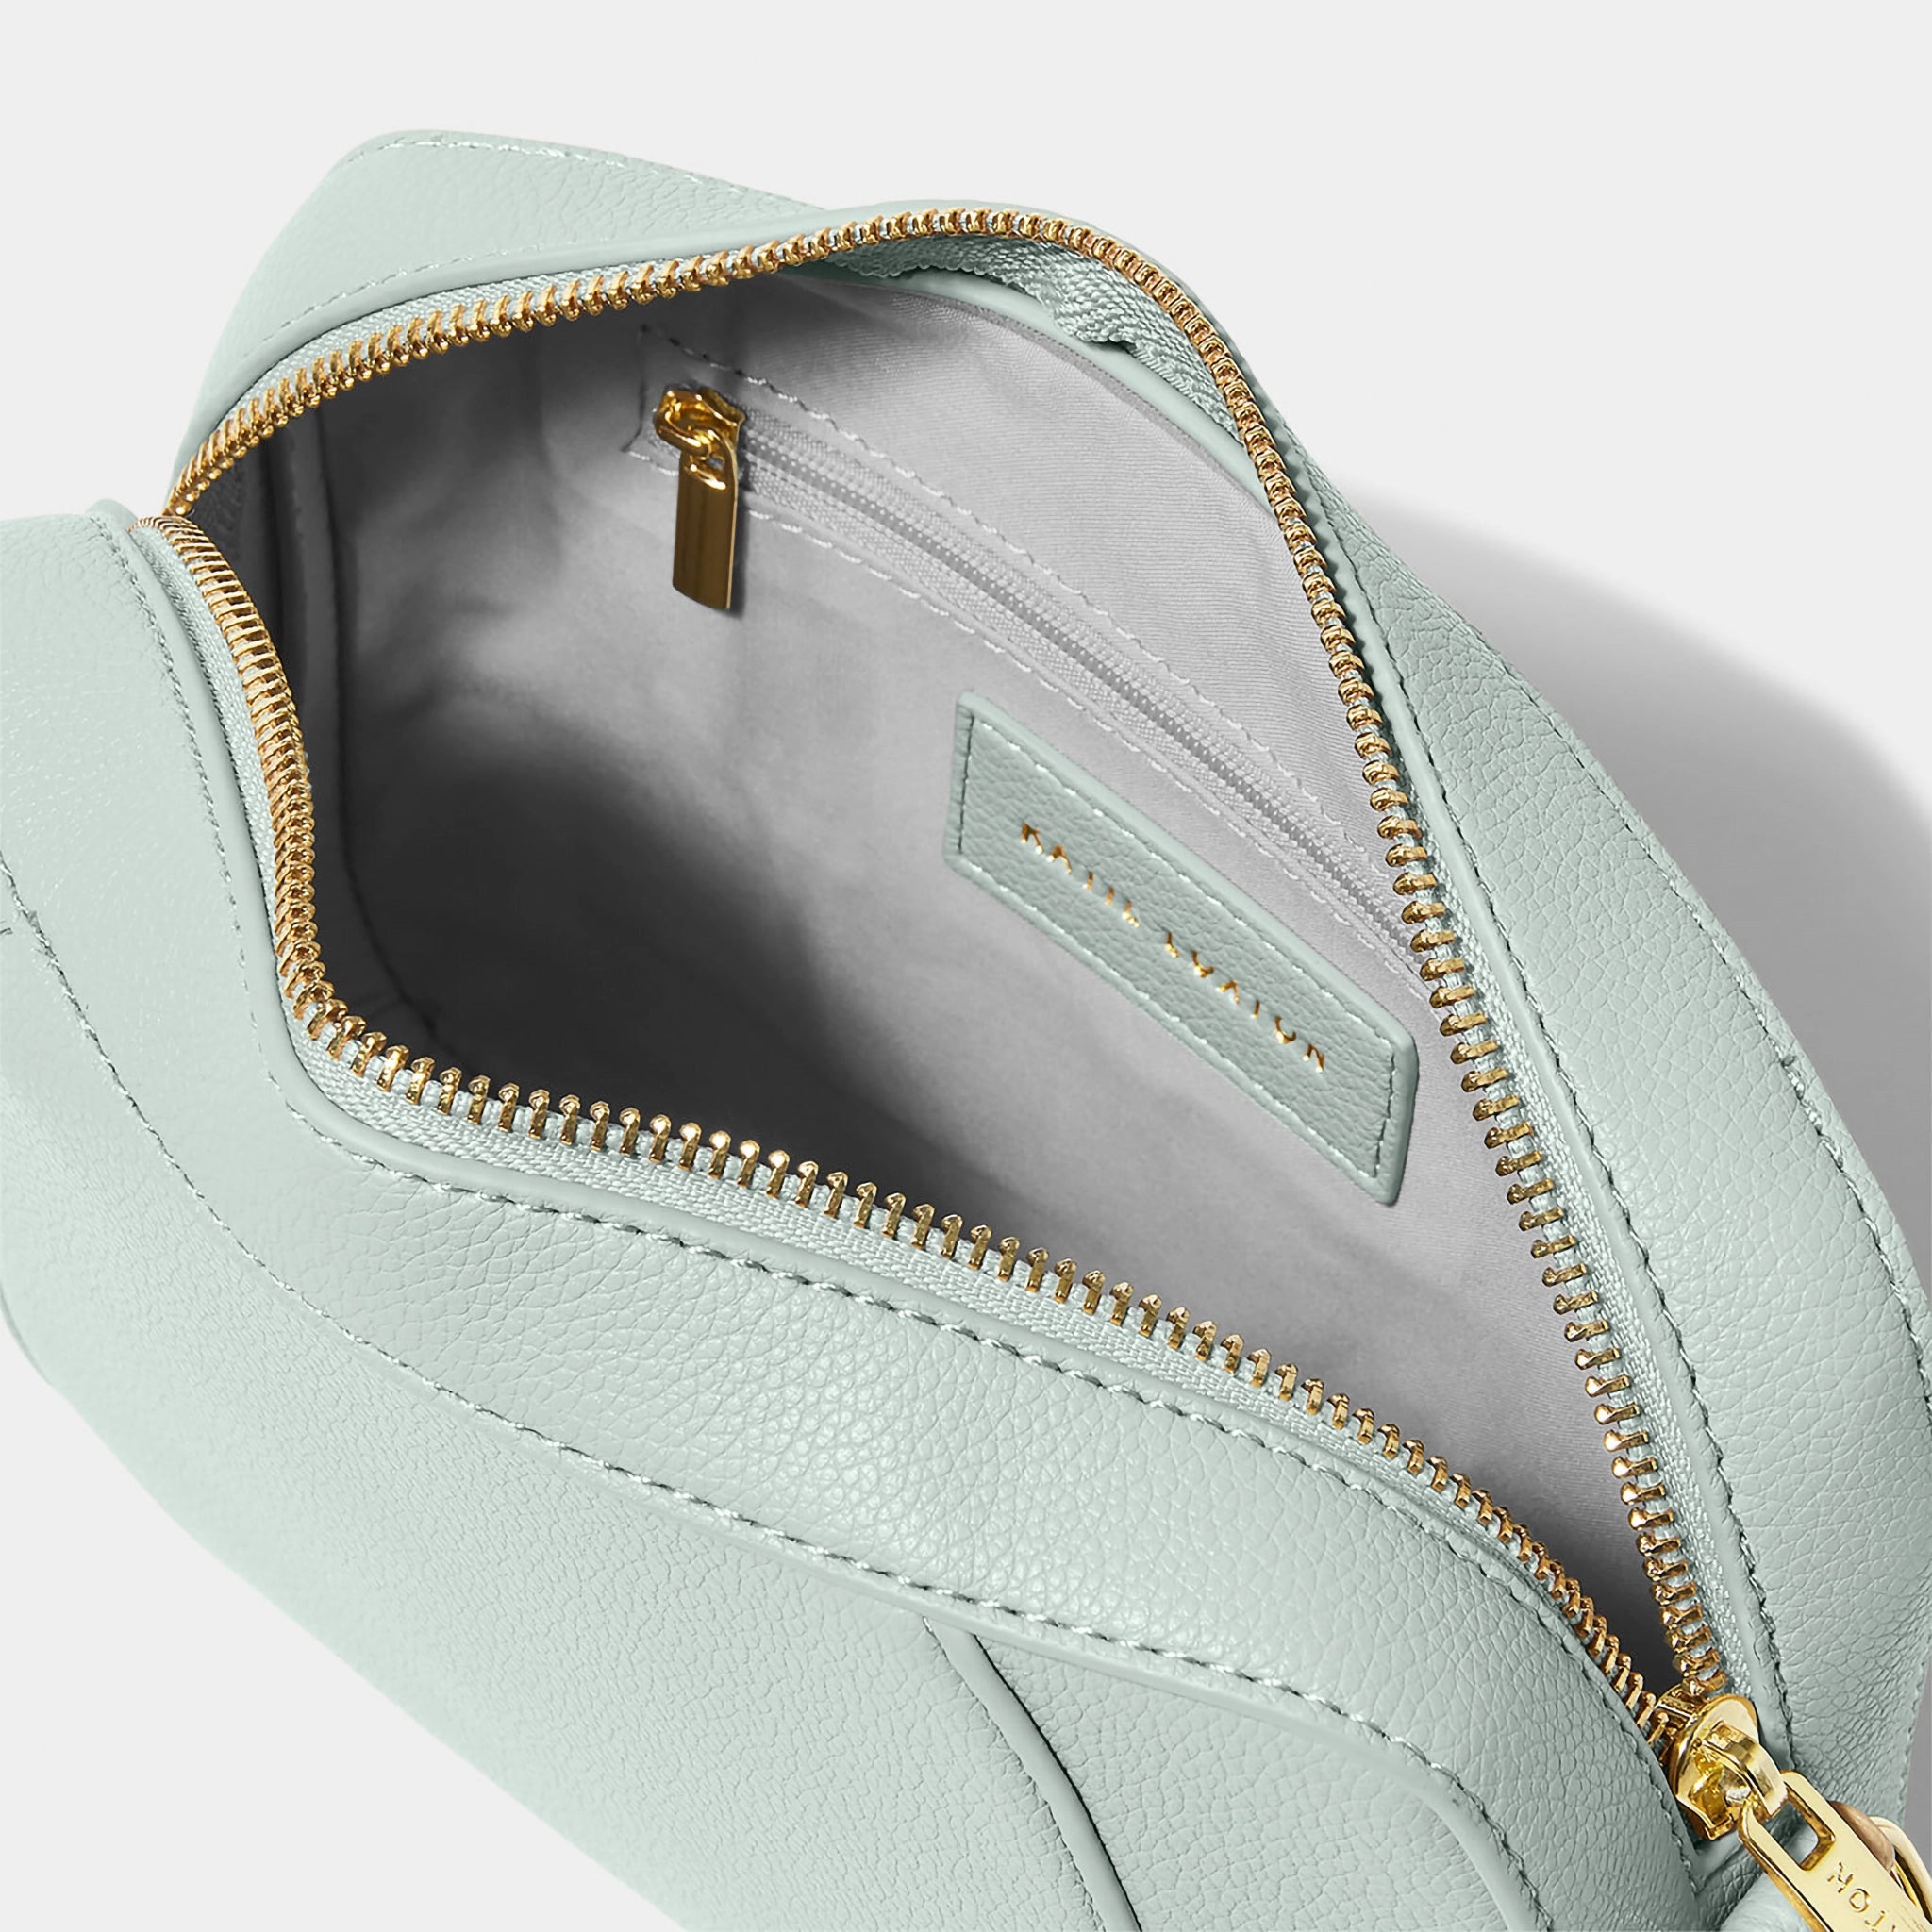 Open light blue crossbody bag in a simple box shape with adjustable strap and gold hardware